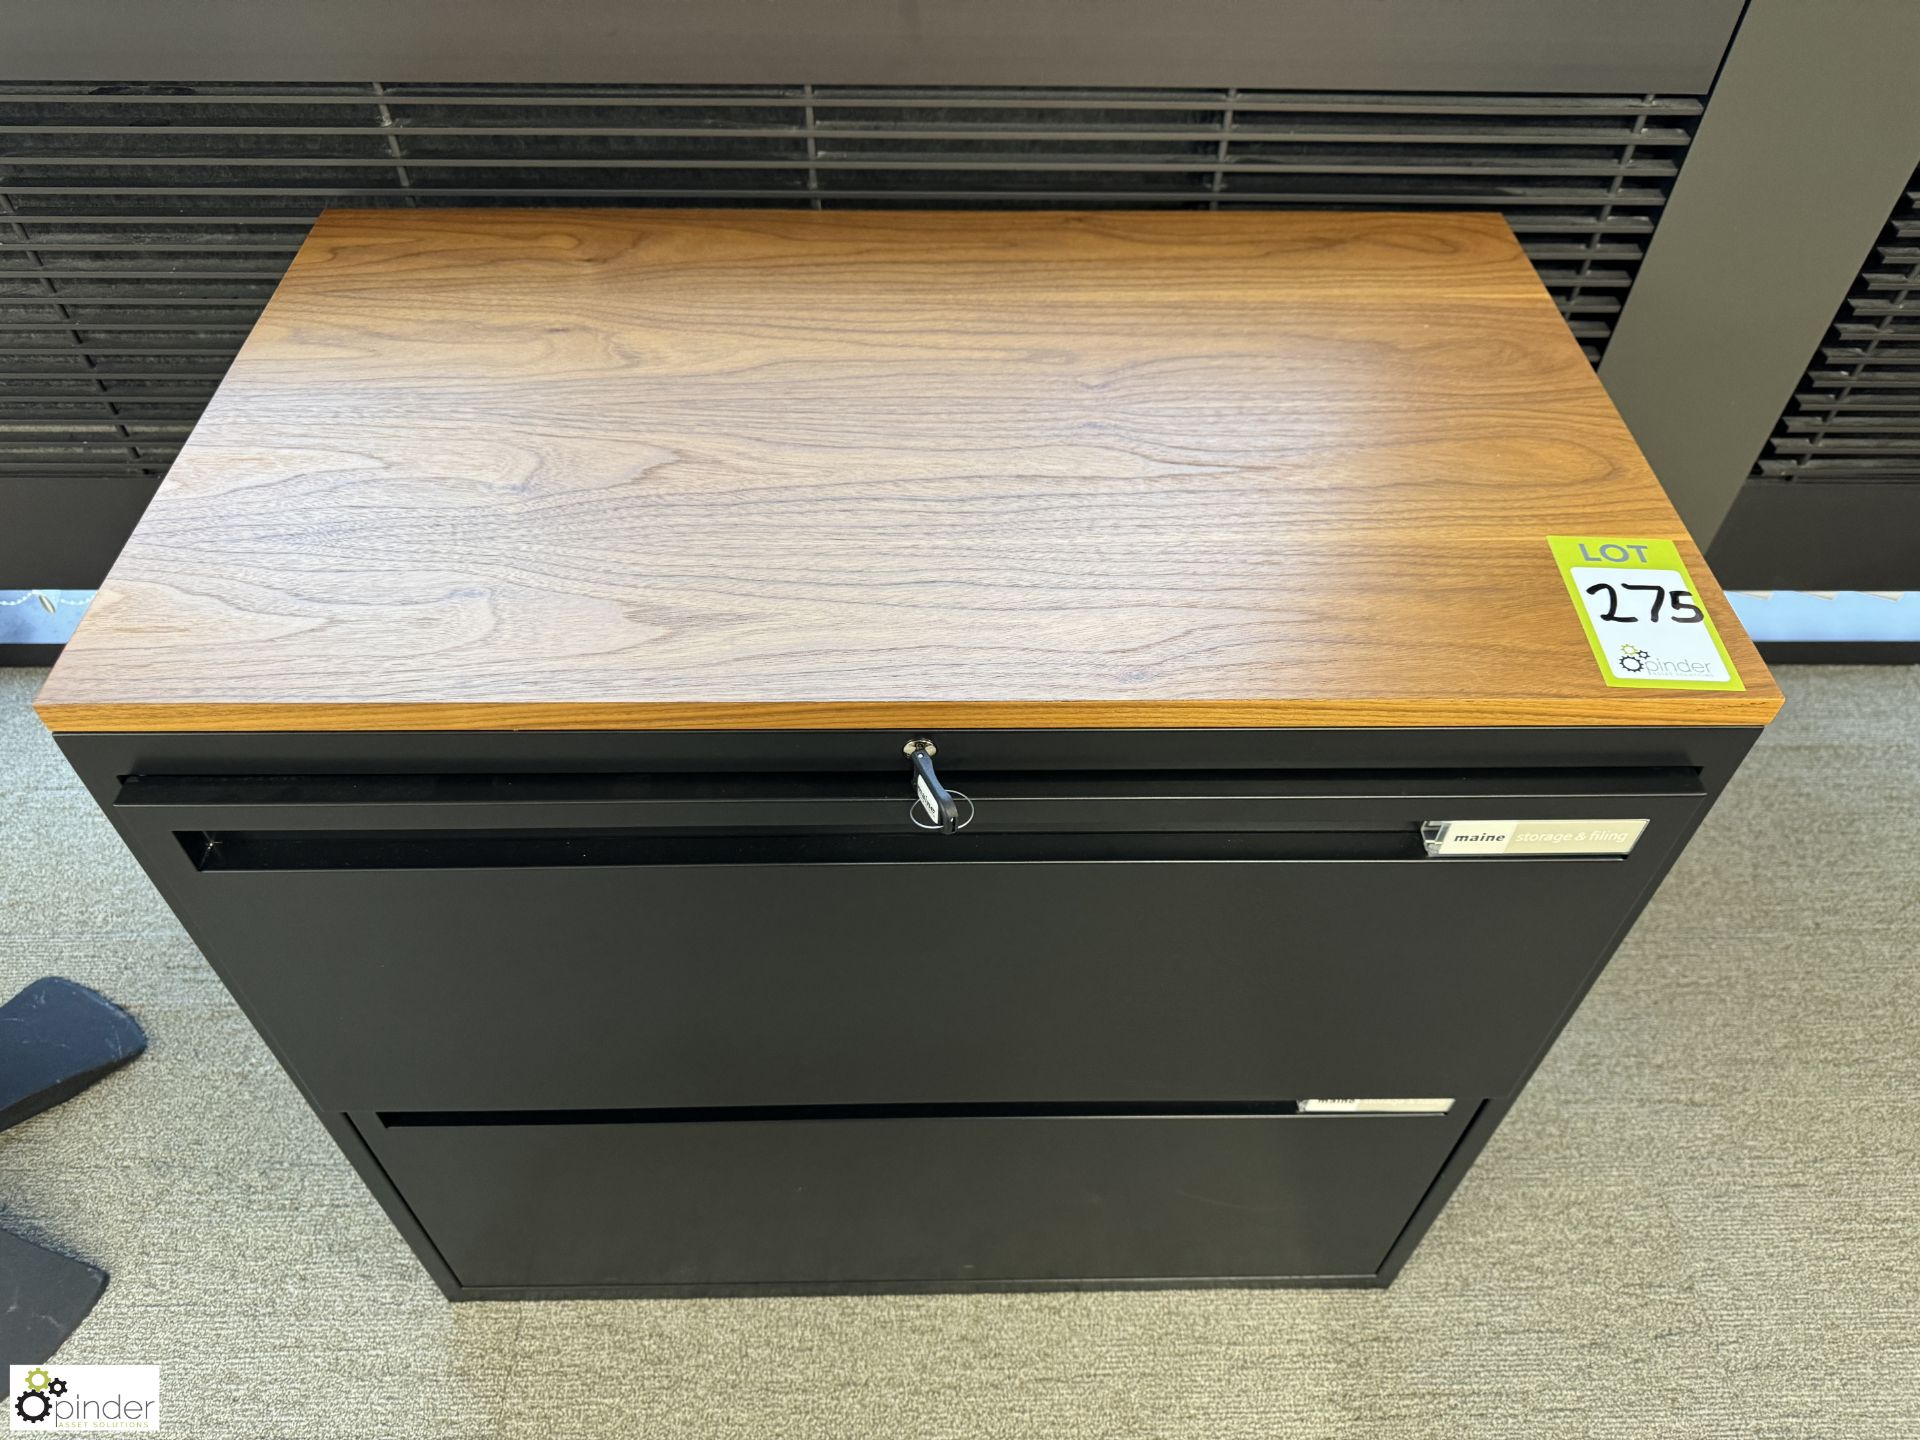 Maine steel 2-door lateral Filing Cabinet, 800mm x 450mm x 730mm, with oak top (location in building - Image 2 of 4